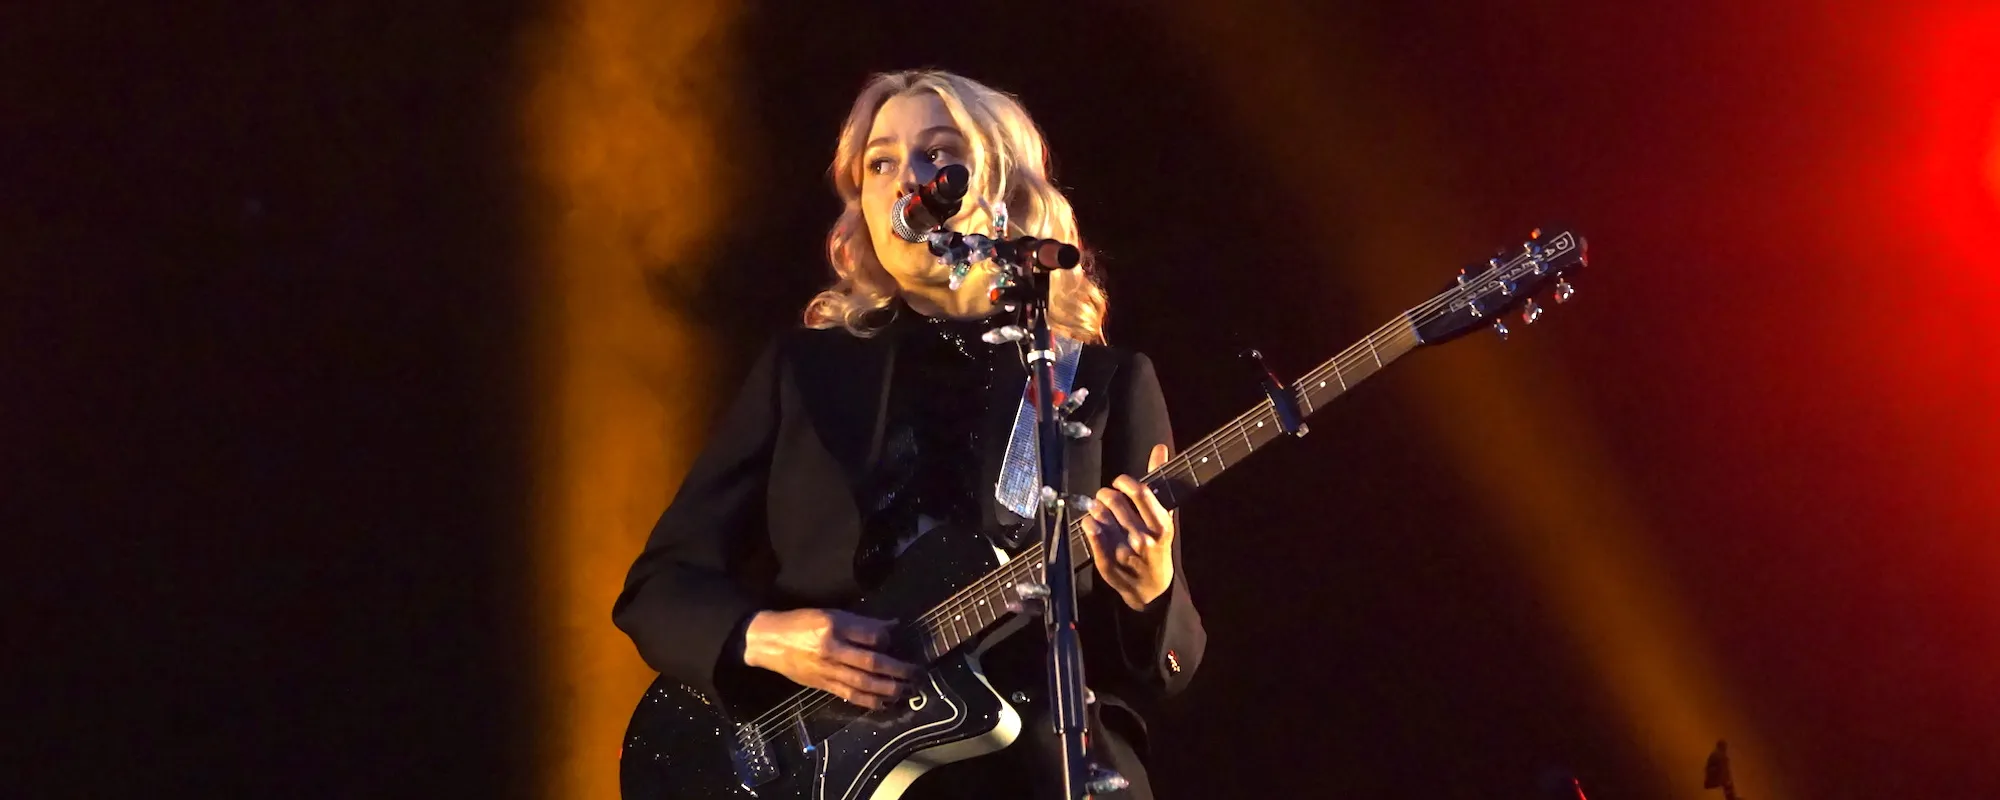 Phoebe Bridgers Shares a Dreamy Cover of The Carpenter’s “Goodbye to Love”